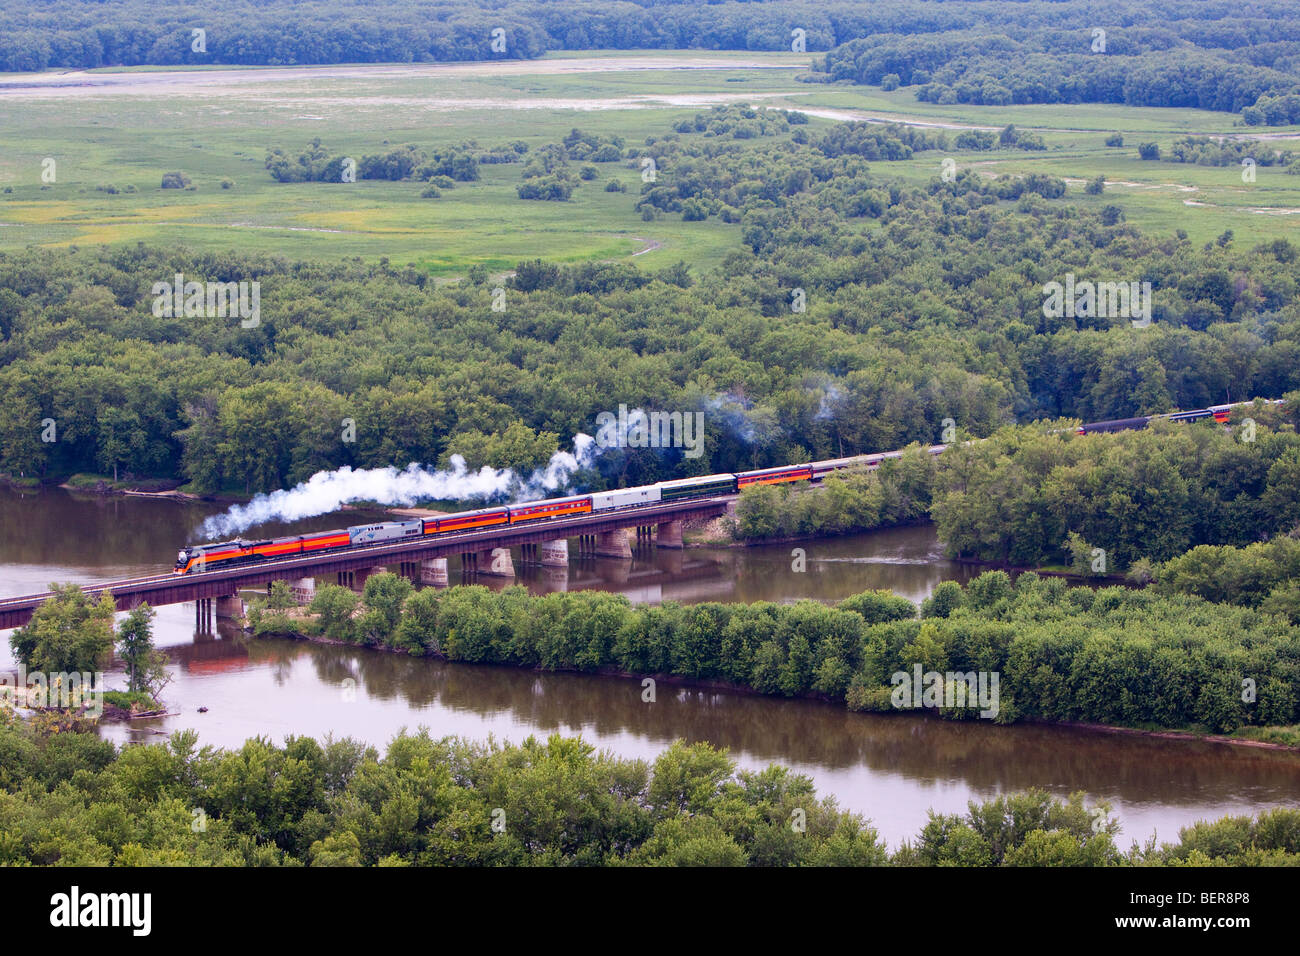 Heading its train over the Wisconsin River, the famous Southern Pacific 4449 steam locomotive is making good time to Chicago. Stock Photo